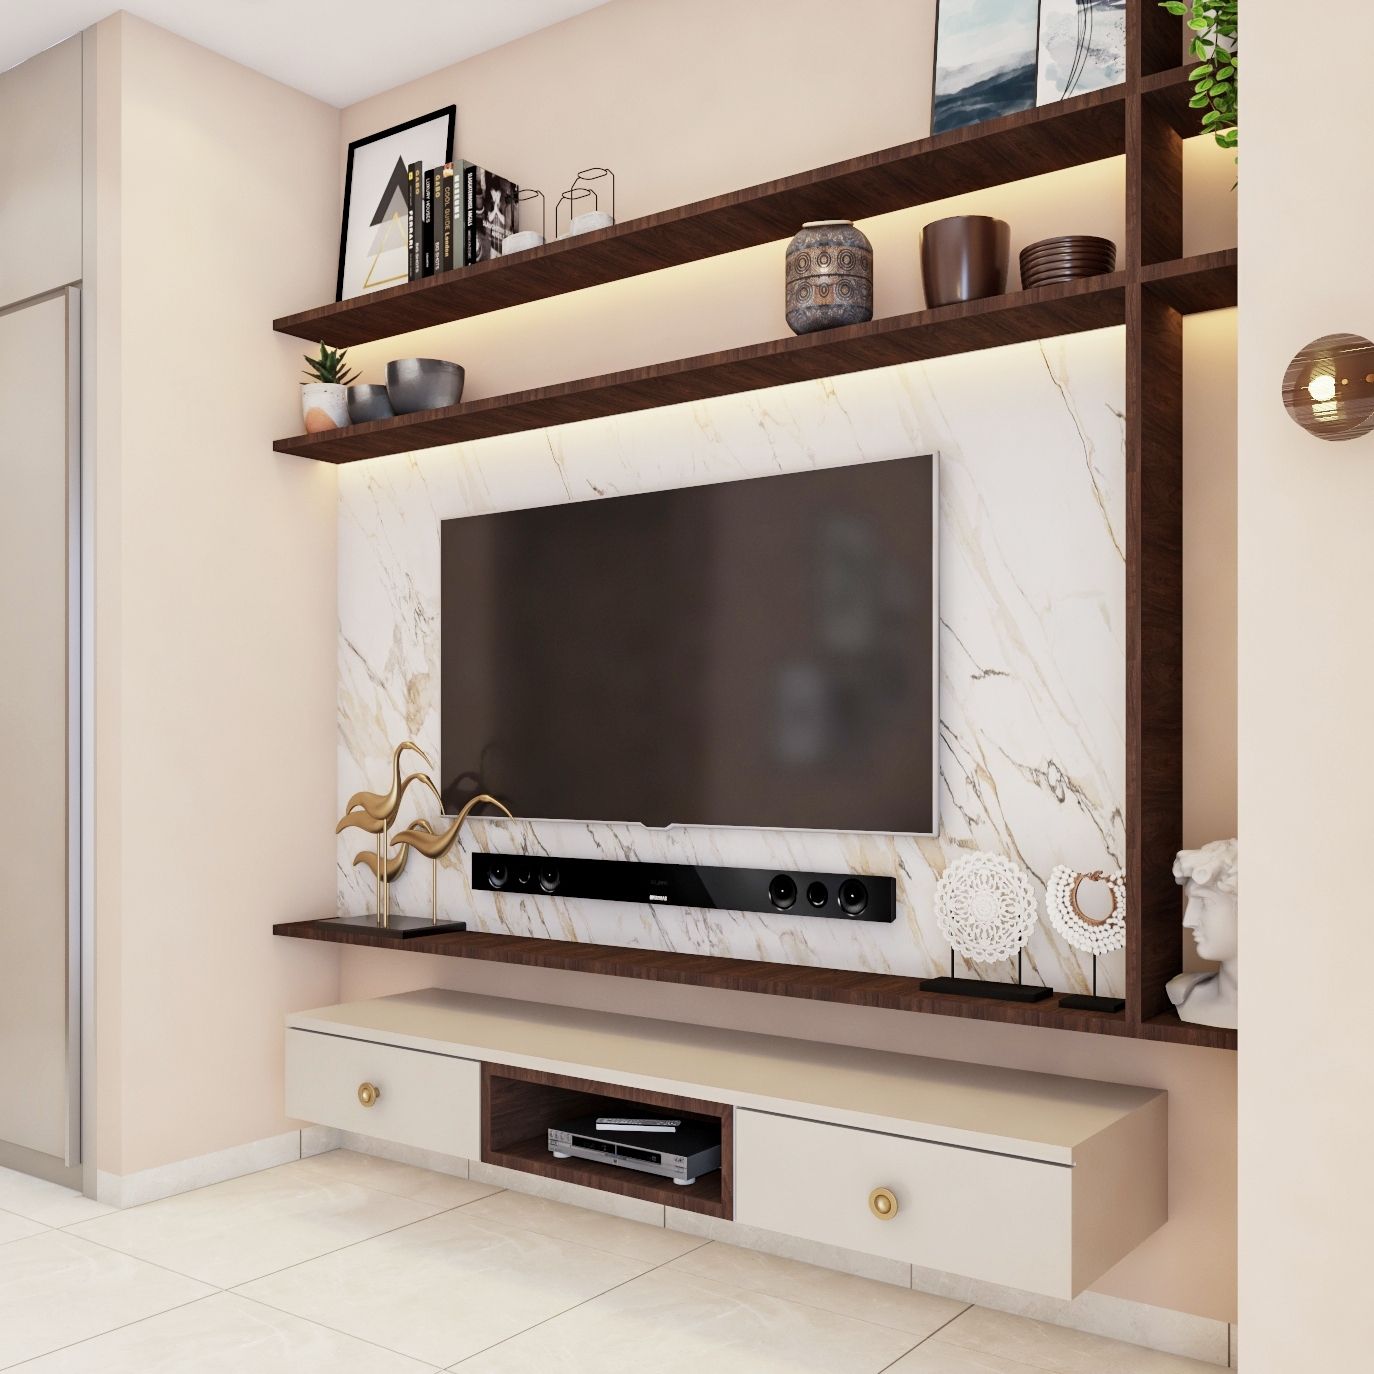 Modern TV Cabinet Design With A Marble Back Panel